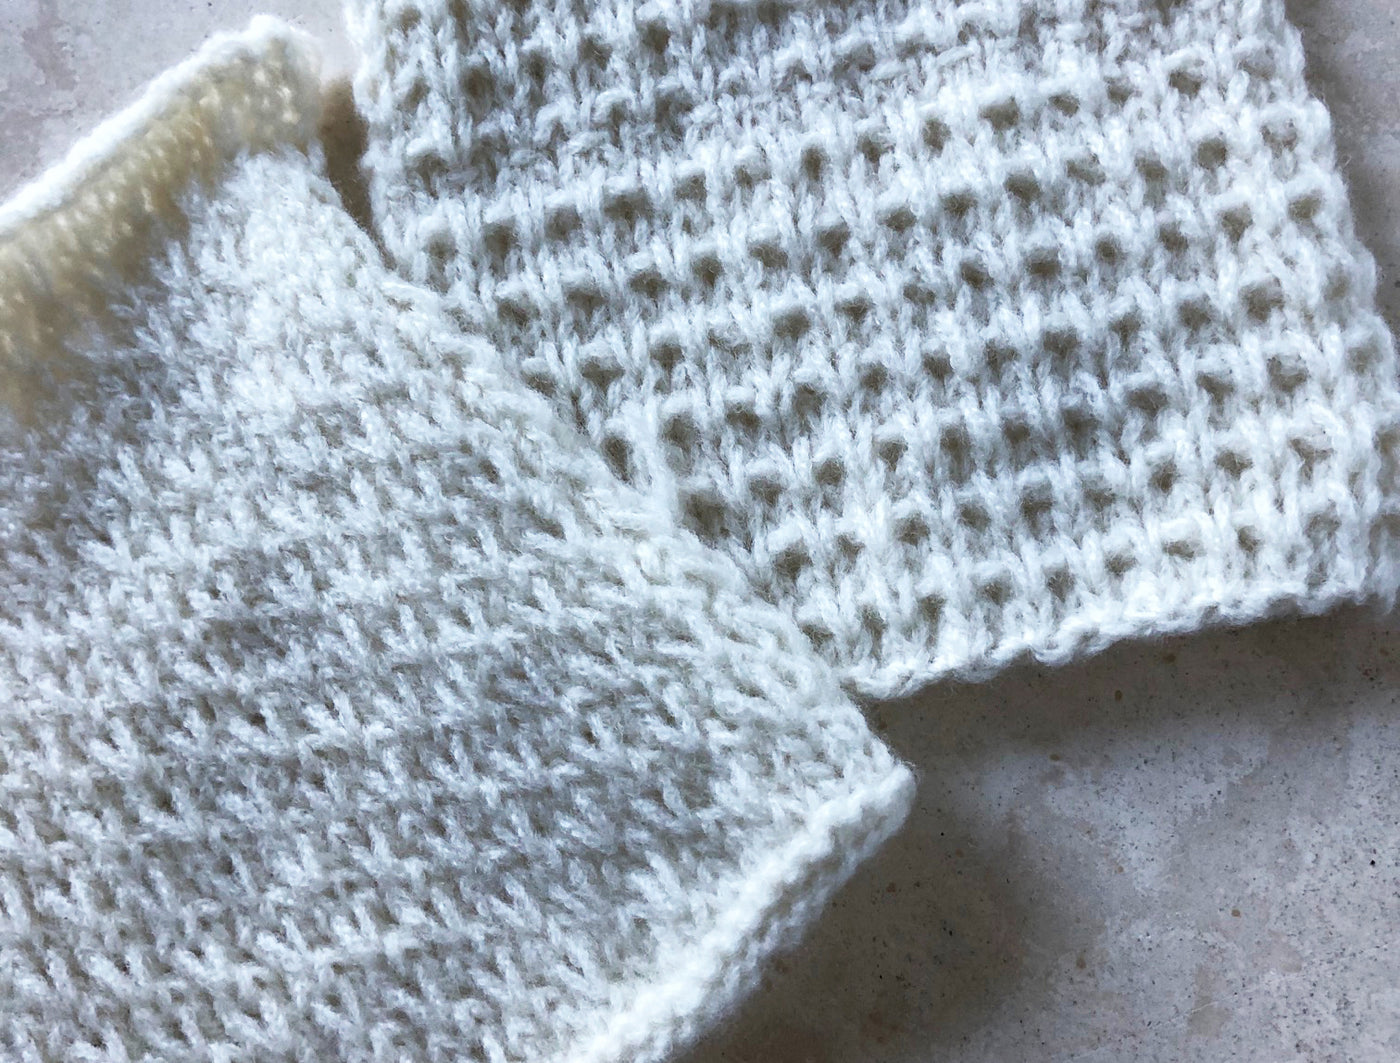 Two Complimentary Slip Stitch Patterns